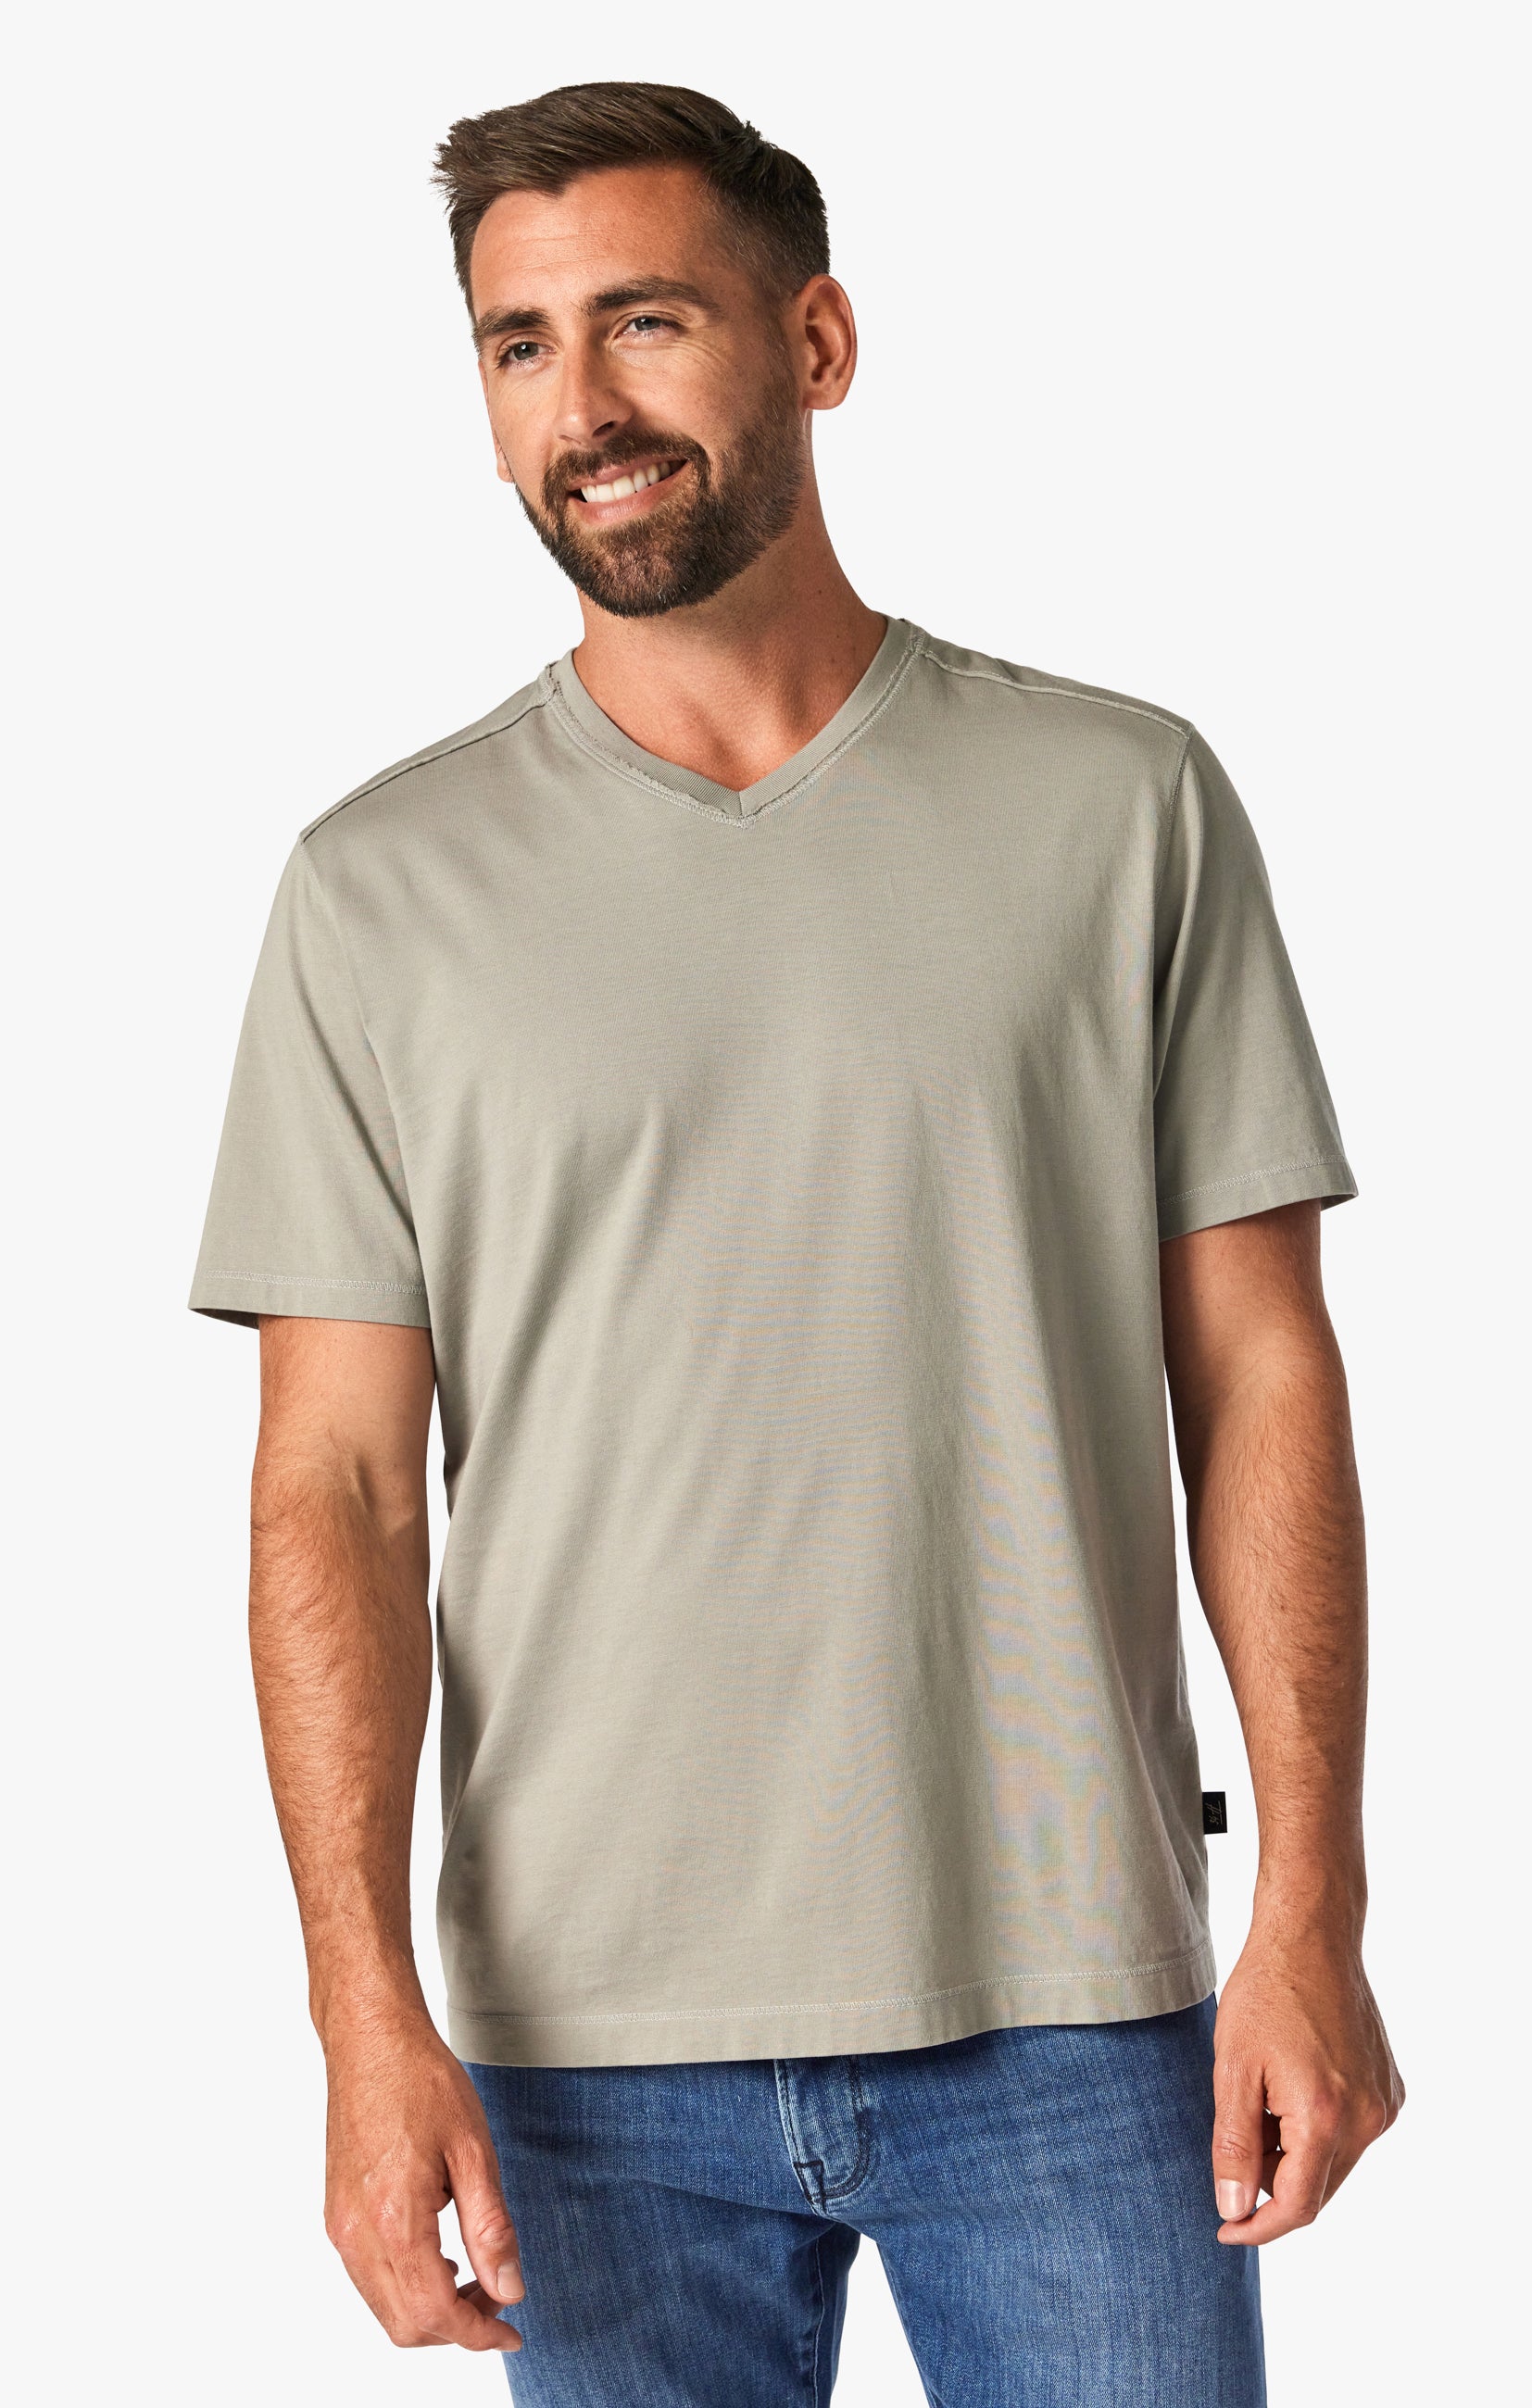 Deconstructed V-Neck T-Shirt in White Dove Image 1